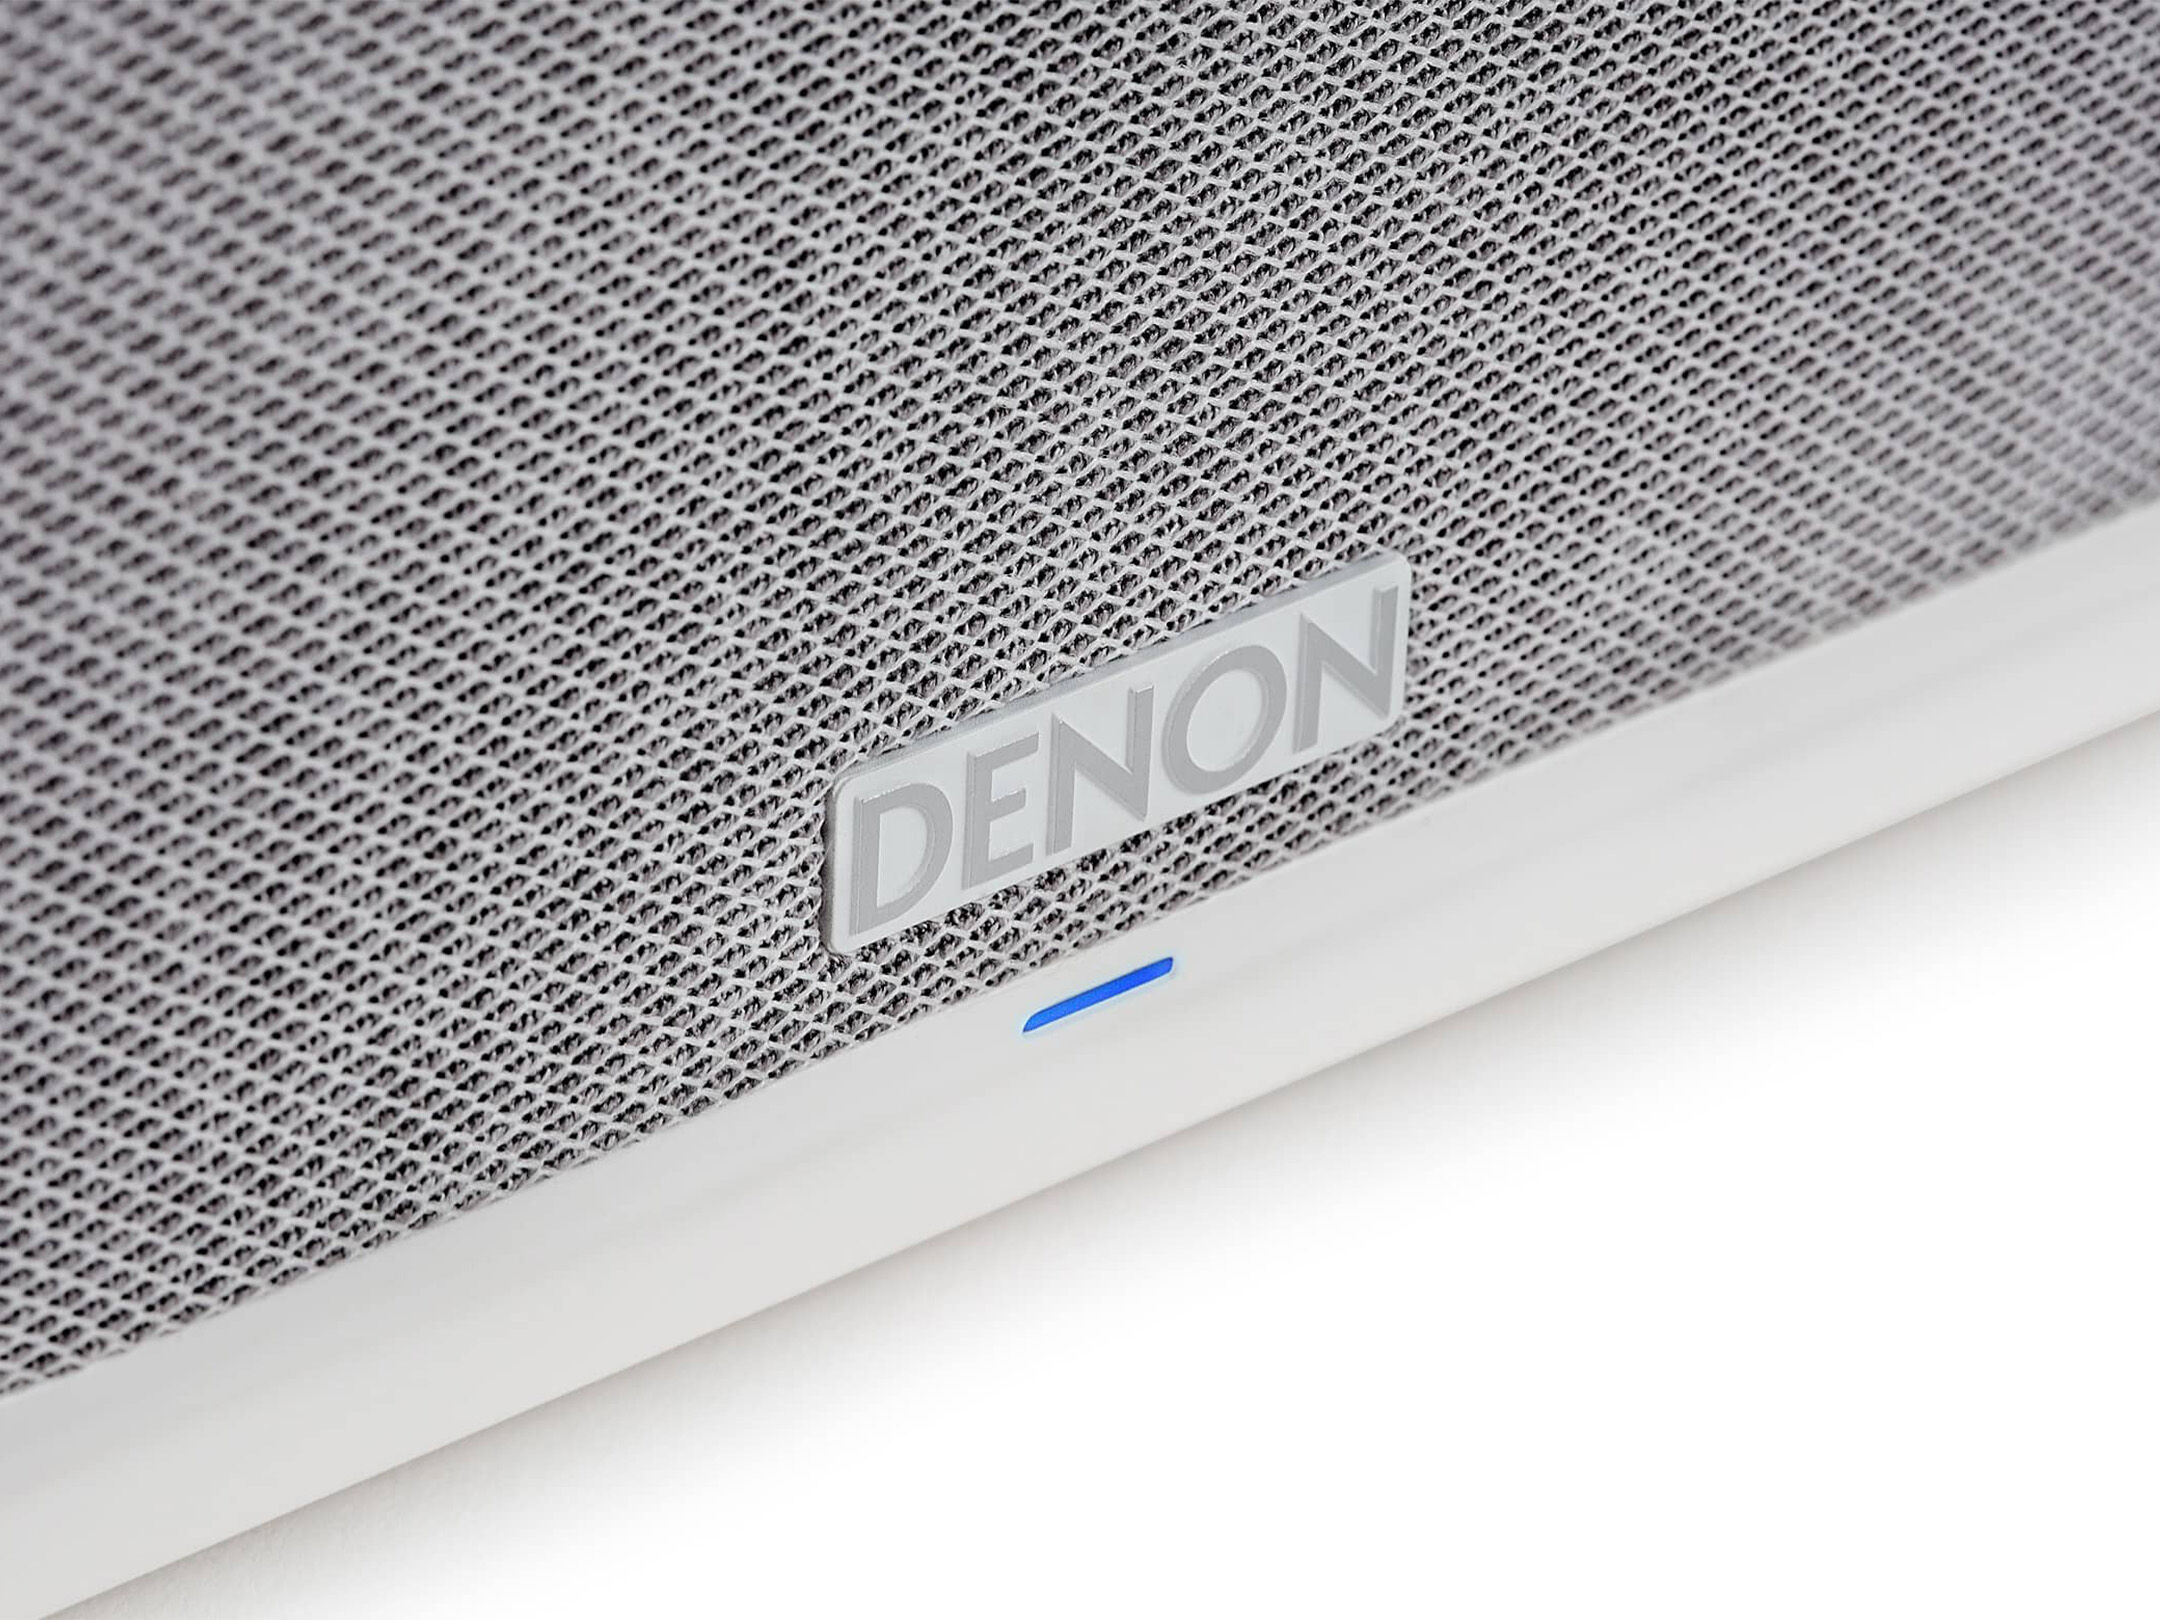 Denon Home 250 - Mid-size Smart Speaker with HEOS® Built-in